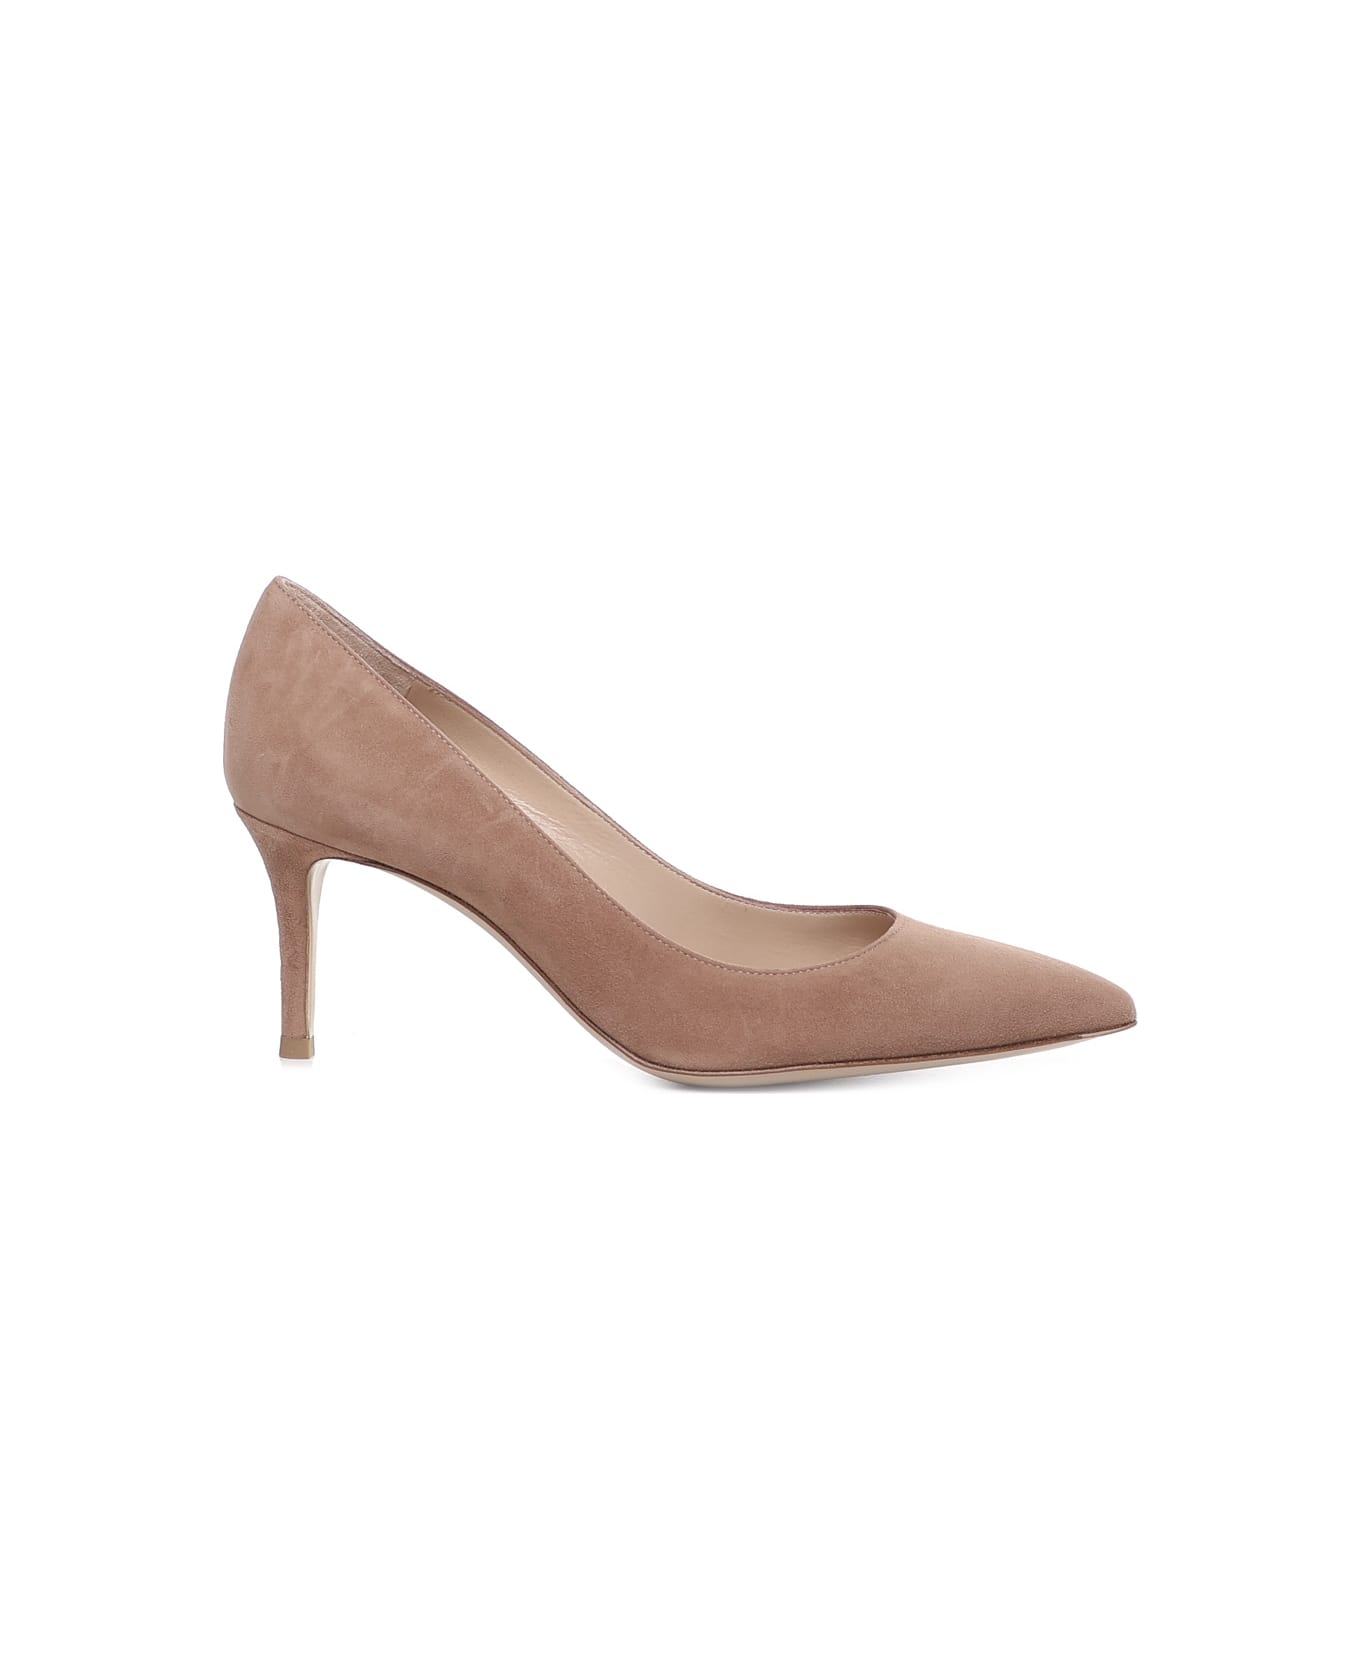 Gianvito Rossi Campral Decollete - Pink ハイヒール